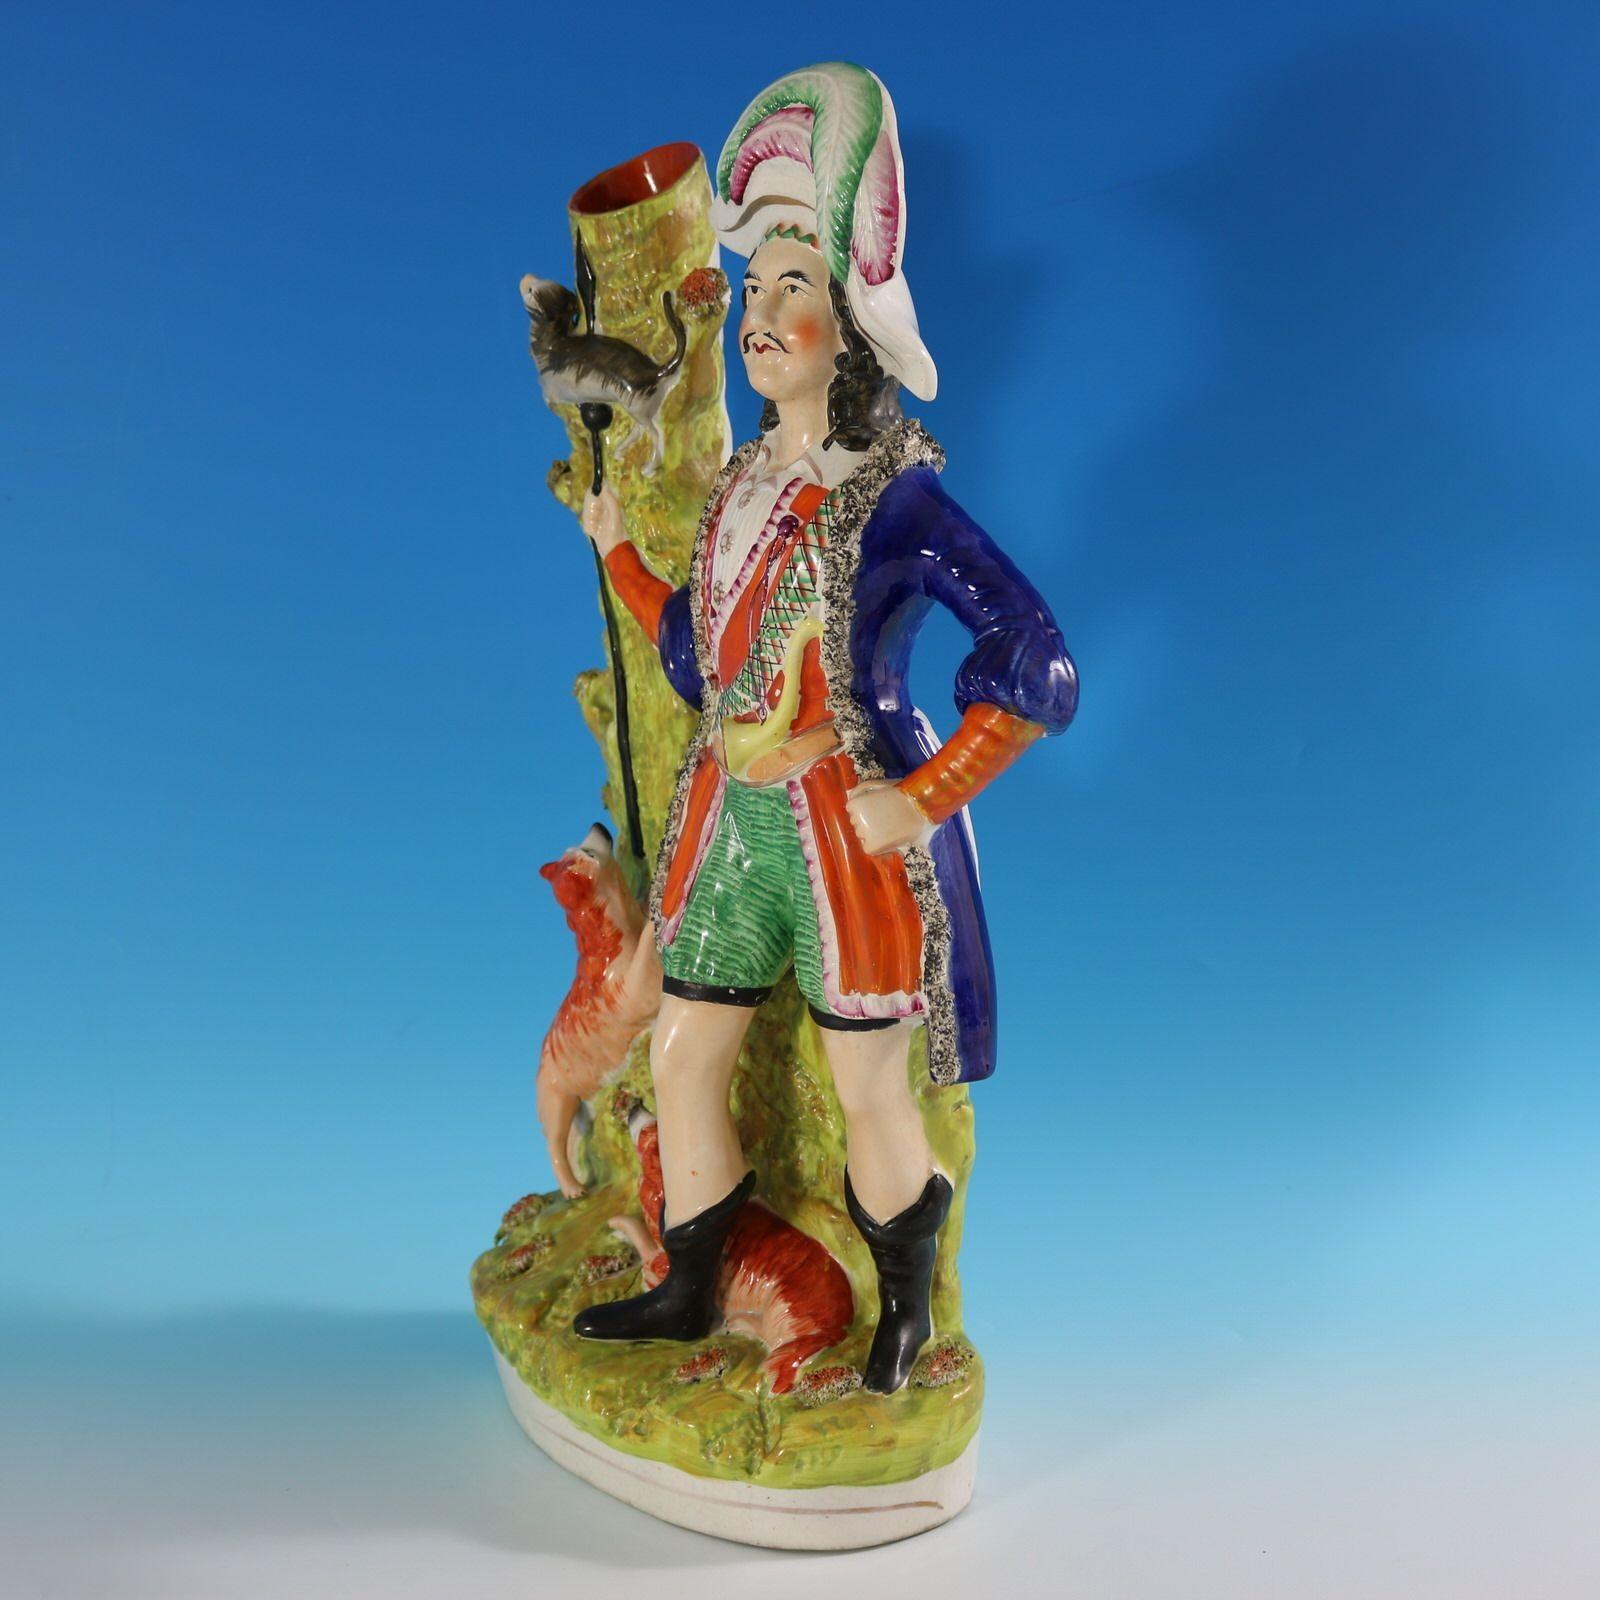 Staffordshire spill vase with a hunting theme which features an otter hunter, his dogs and an otter impaled on his spear. Multi-coloured with underglaze blue version. Dull gilt base line and embellishment. Book reference,'Victorian Staffordshire